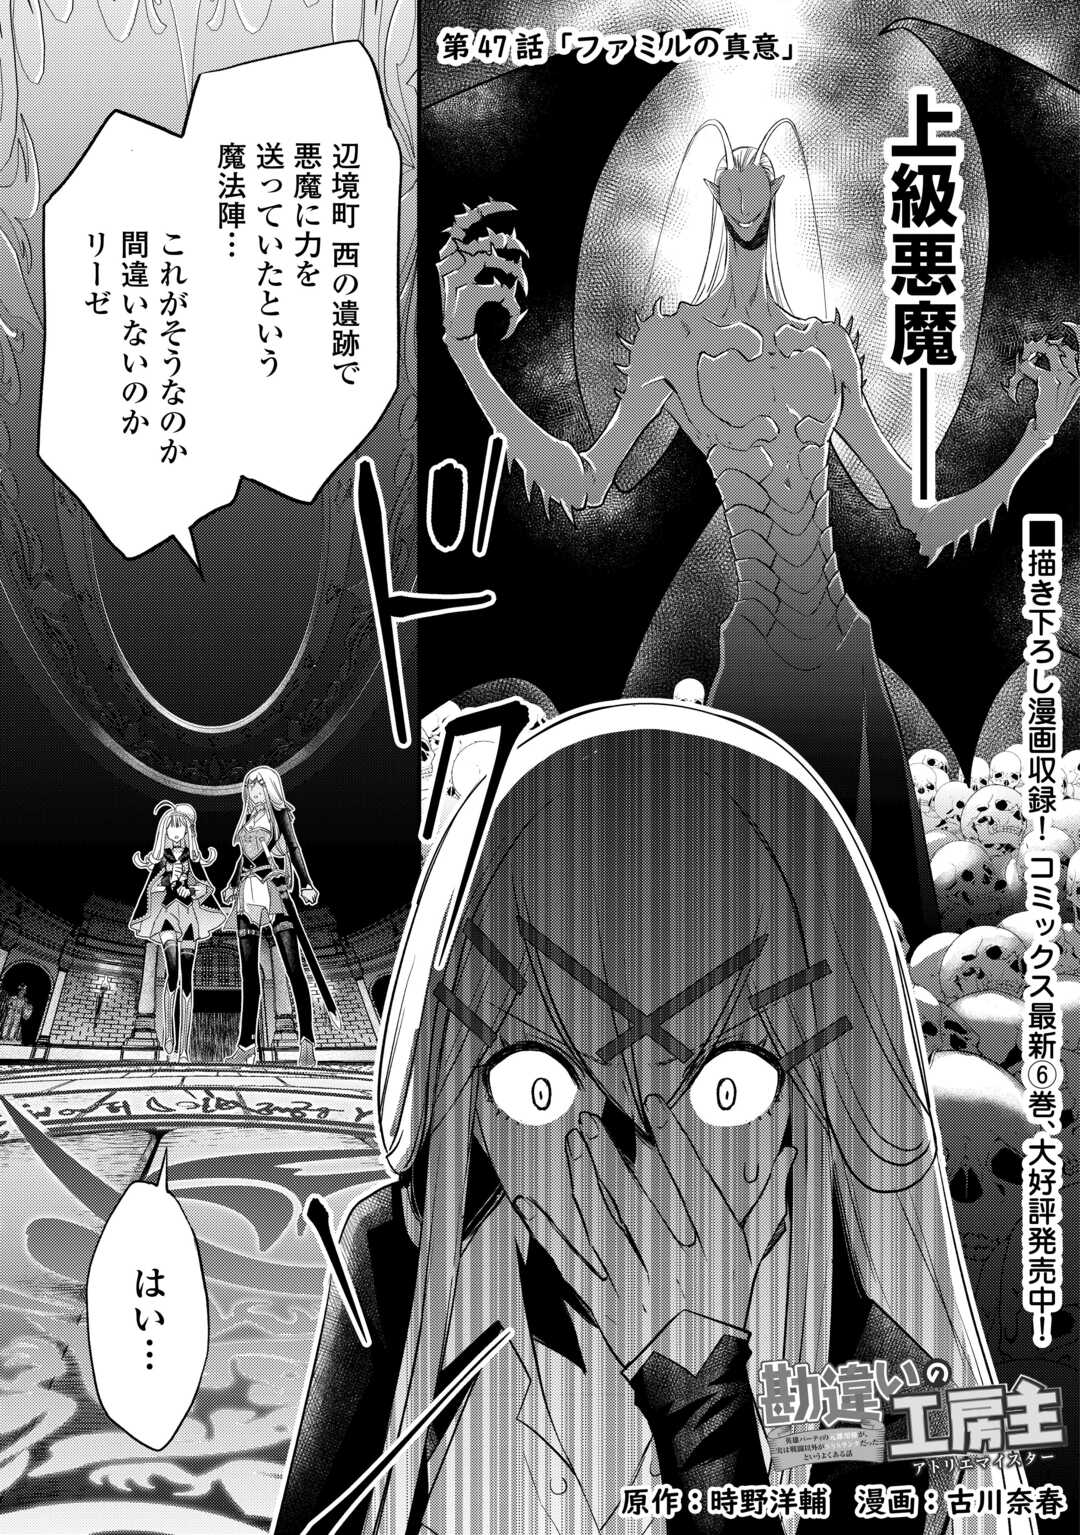 Kanchigai no Atelier Meister - Chapter 47 - Page 1